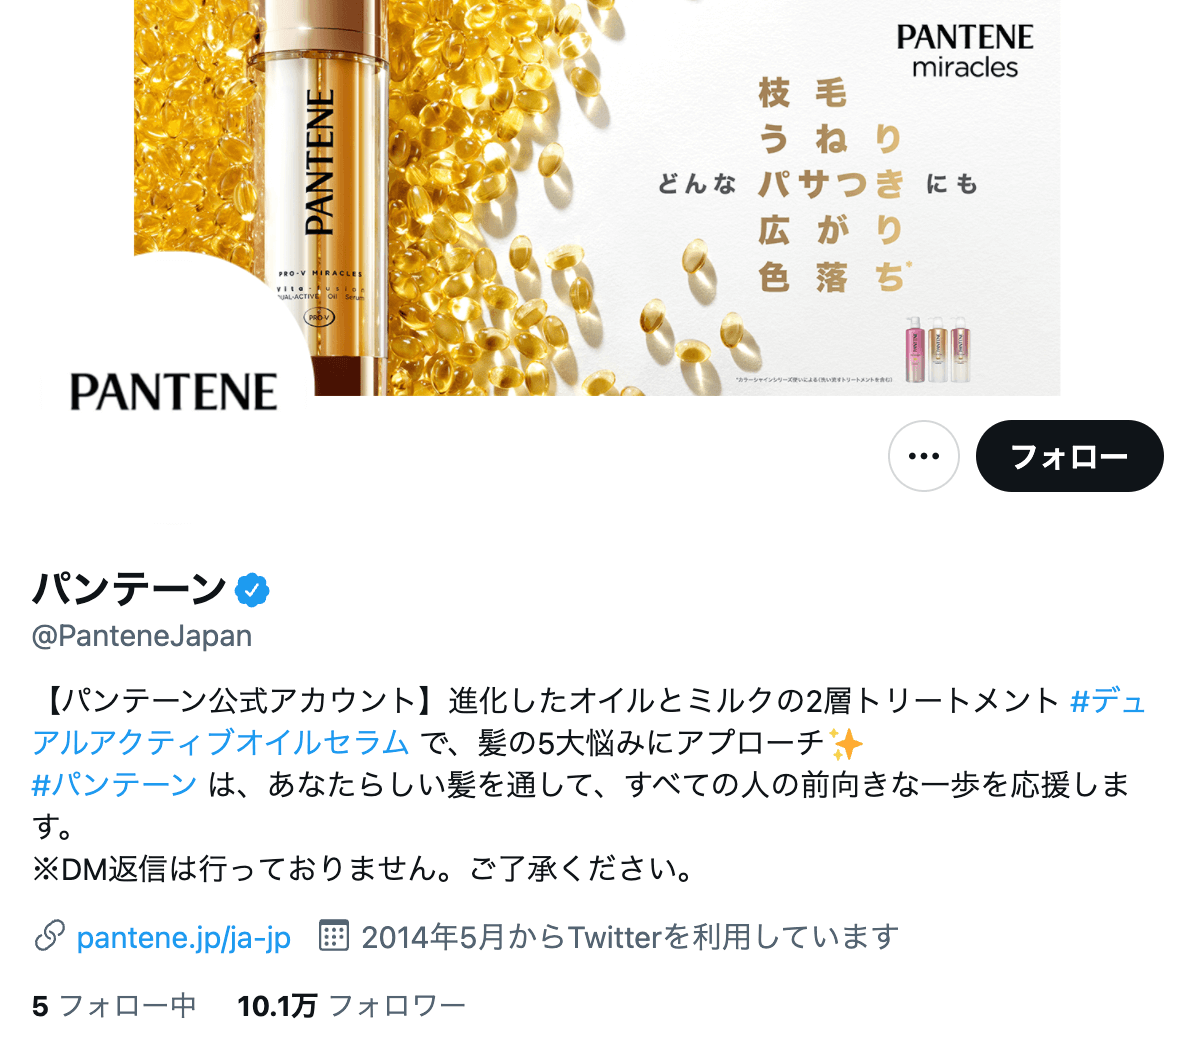 twitter-official-account-pantenejapan